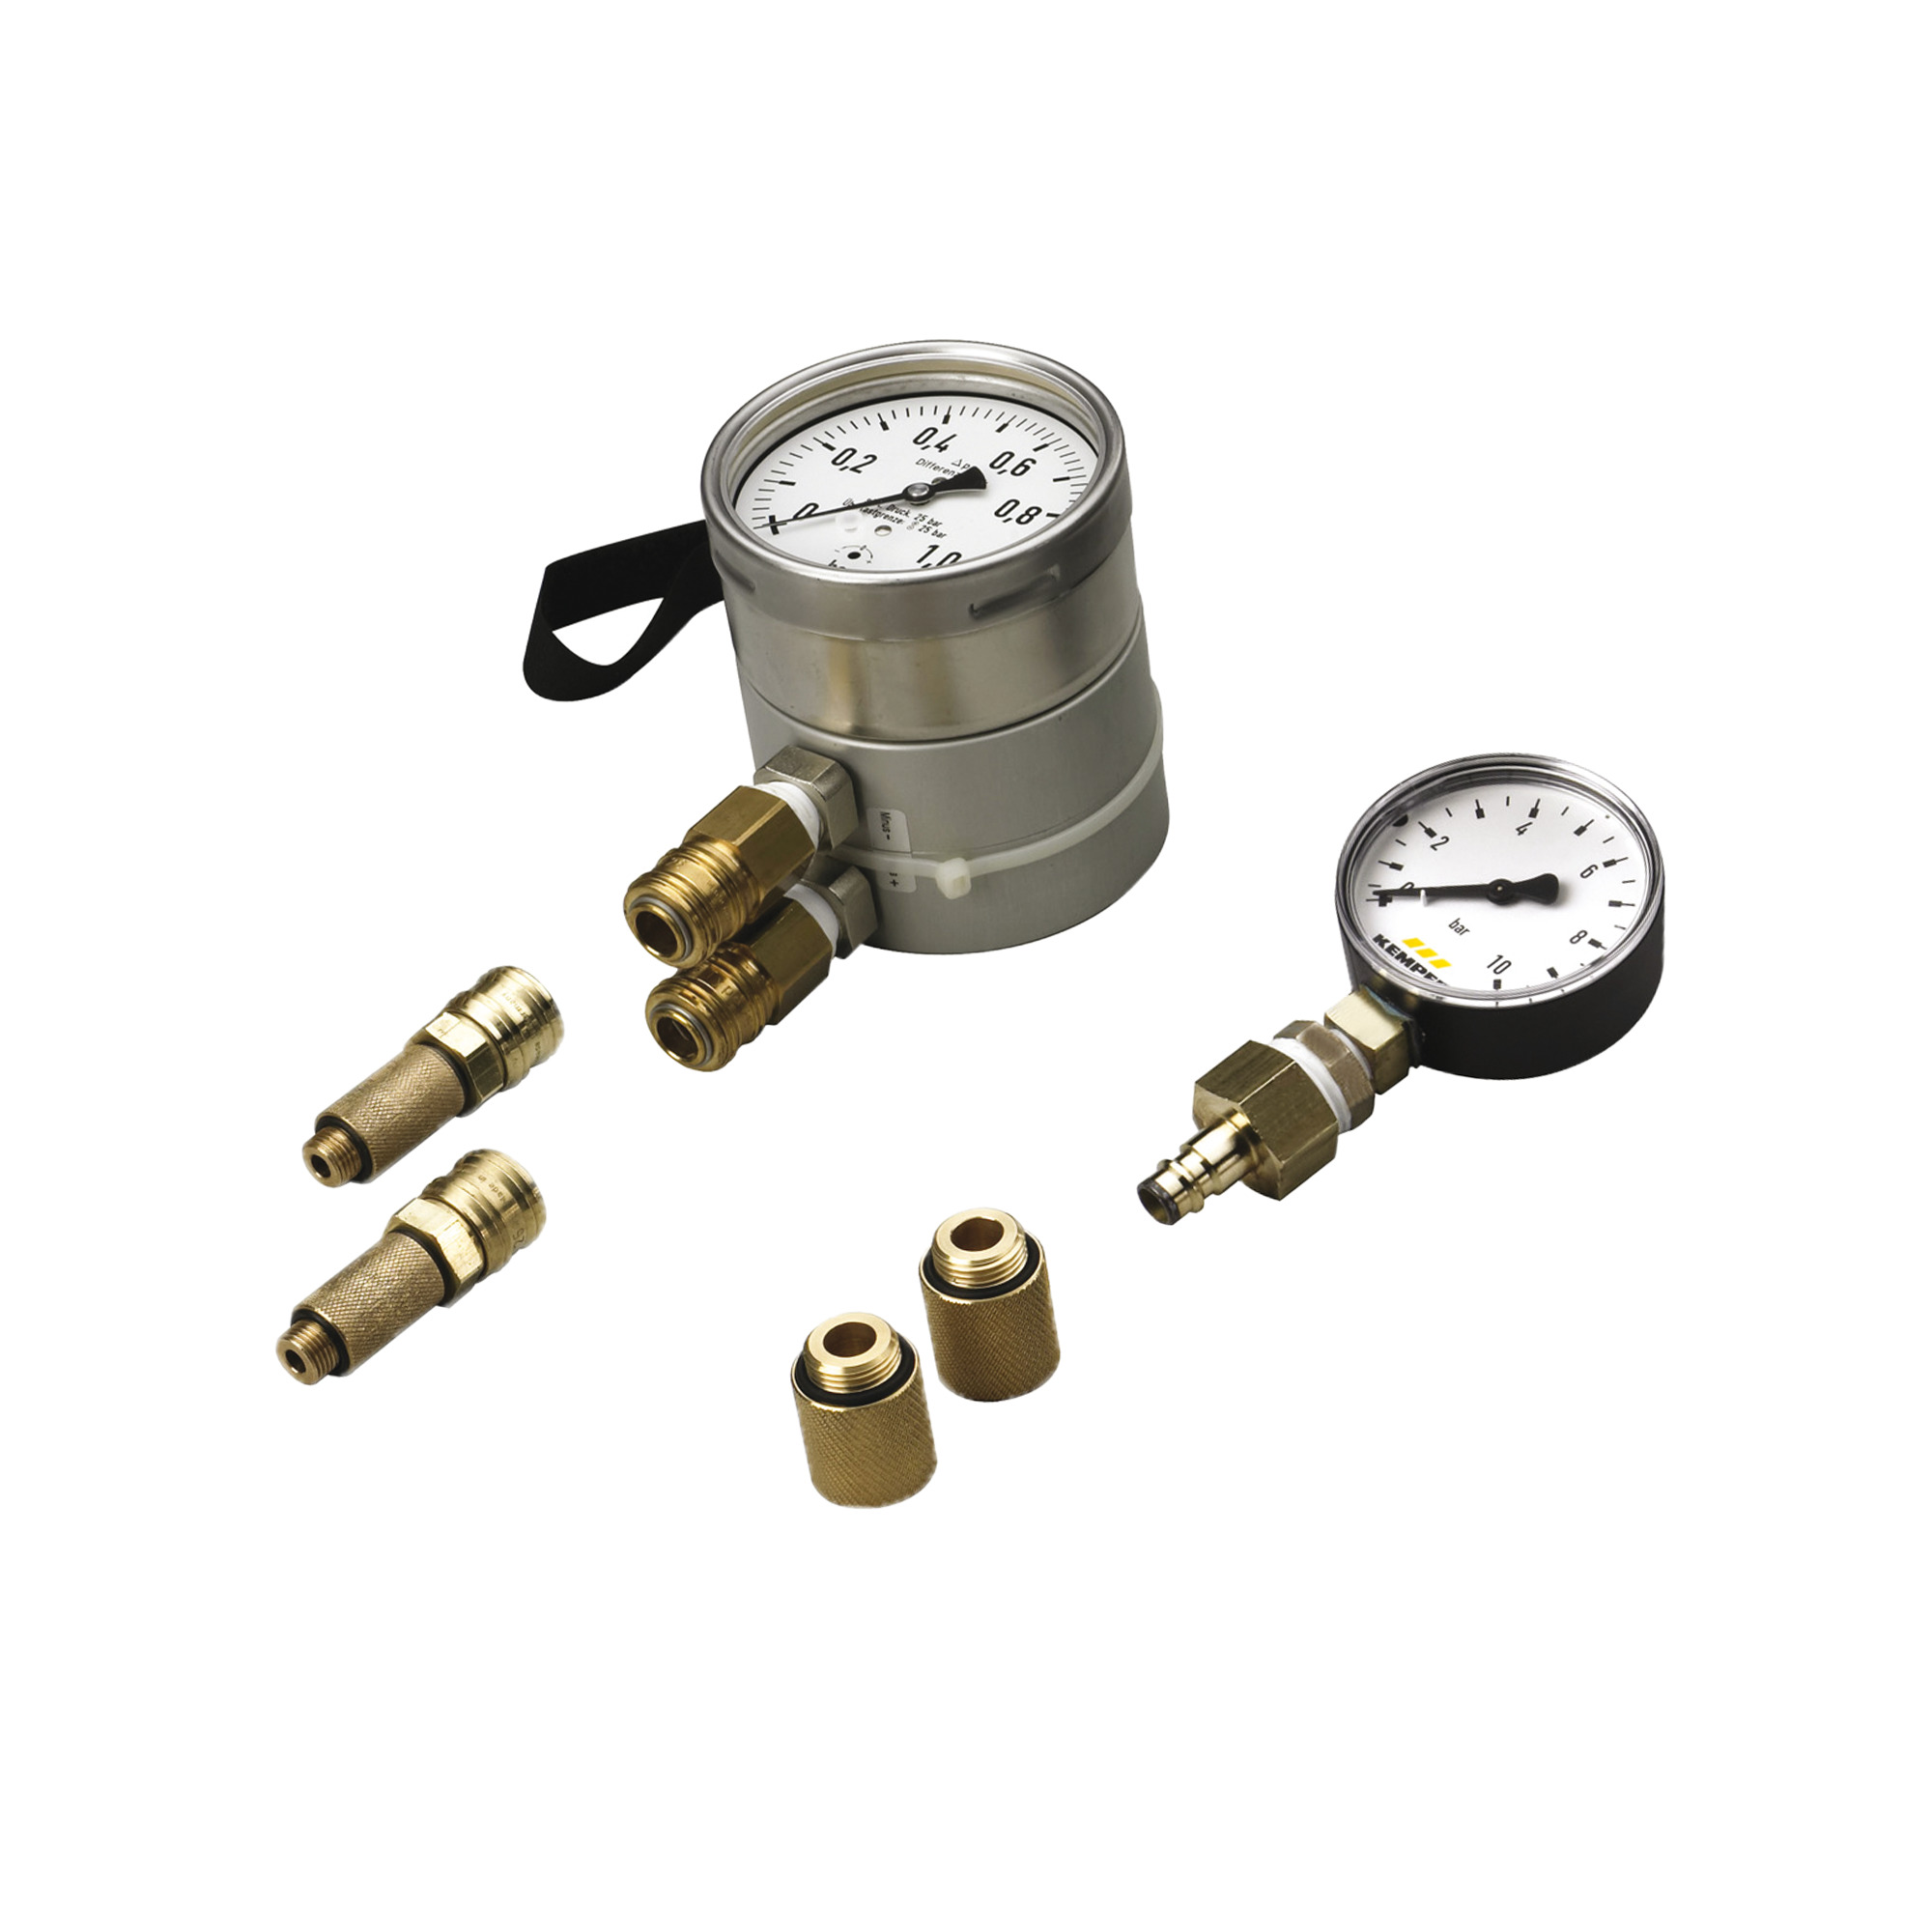 Accessories for Safety Valves